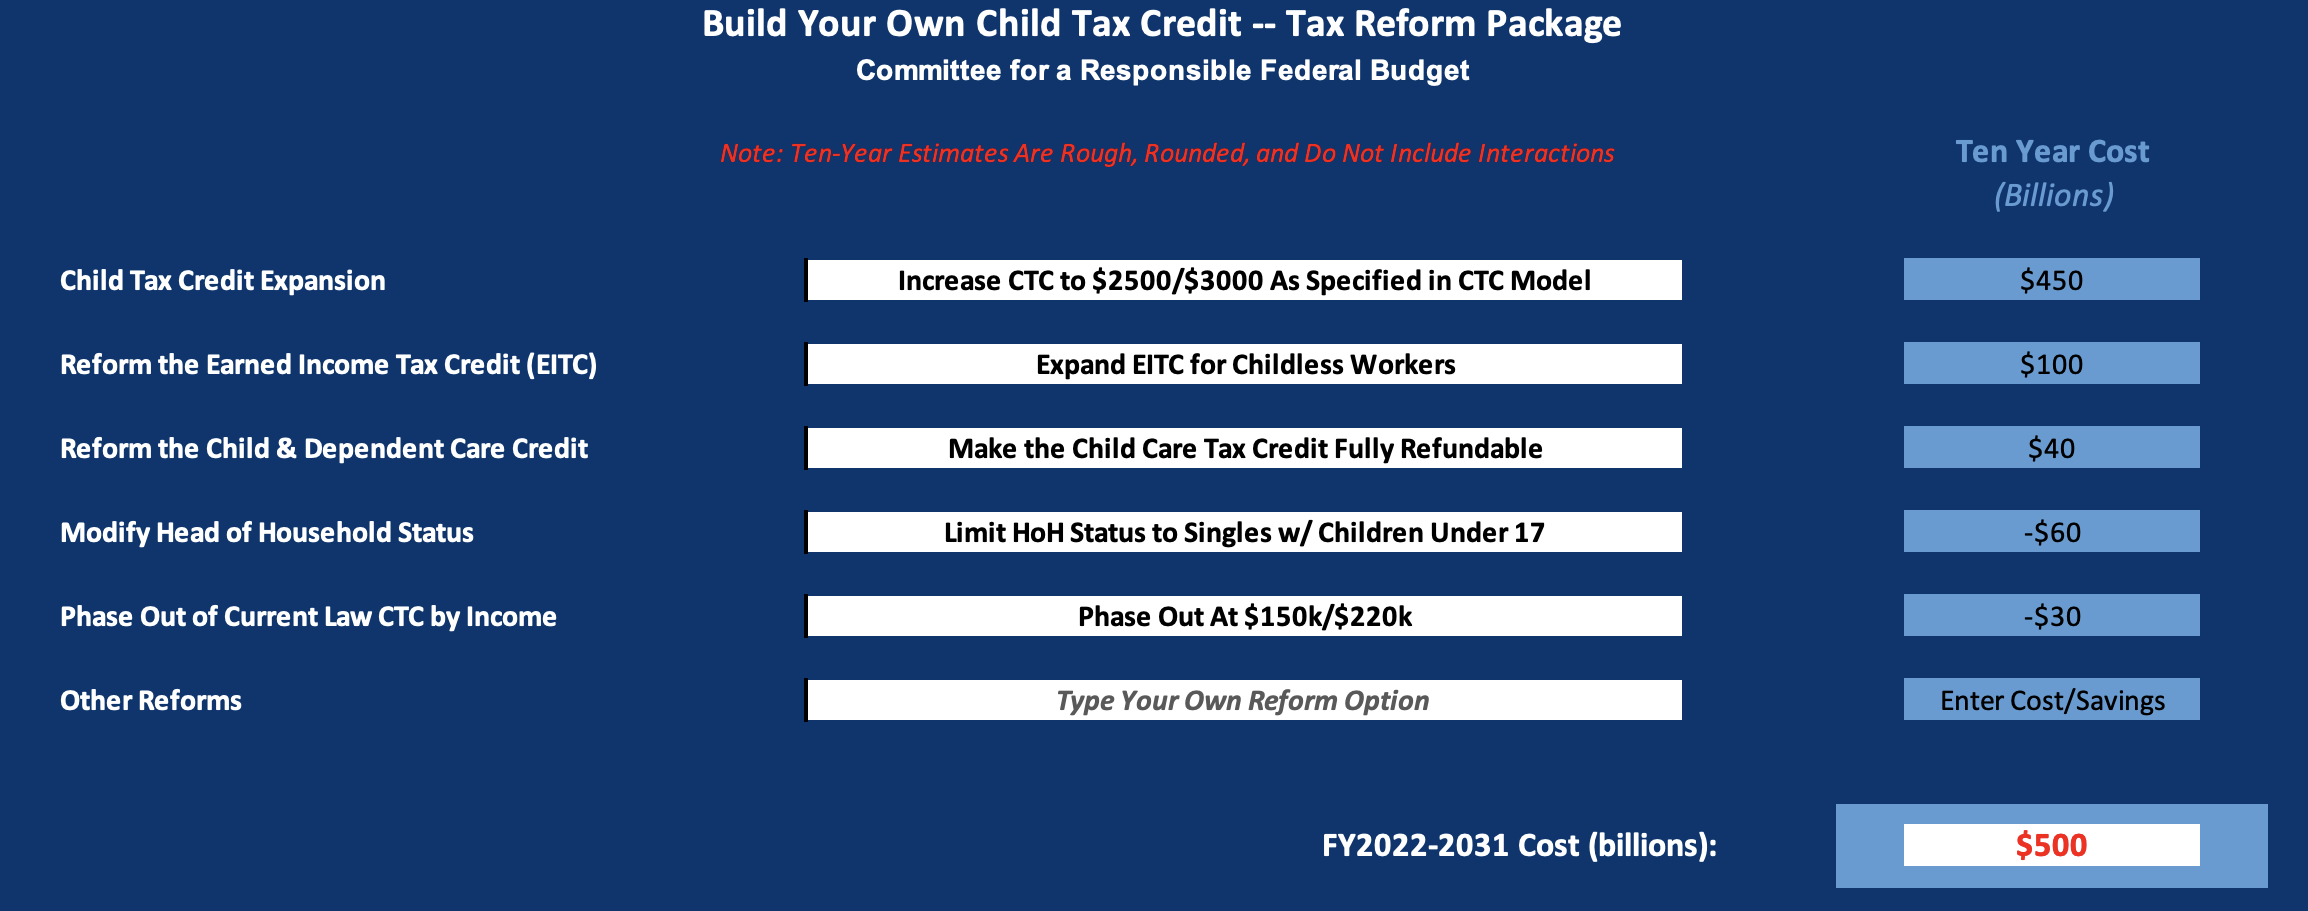 build-your-own-child-tax-credit-2-0-committee-for-a-responsible